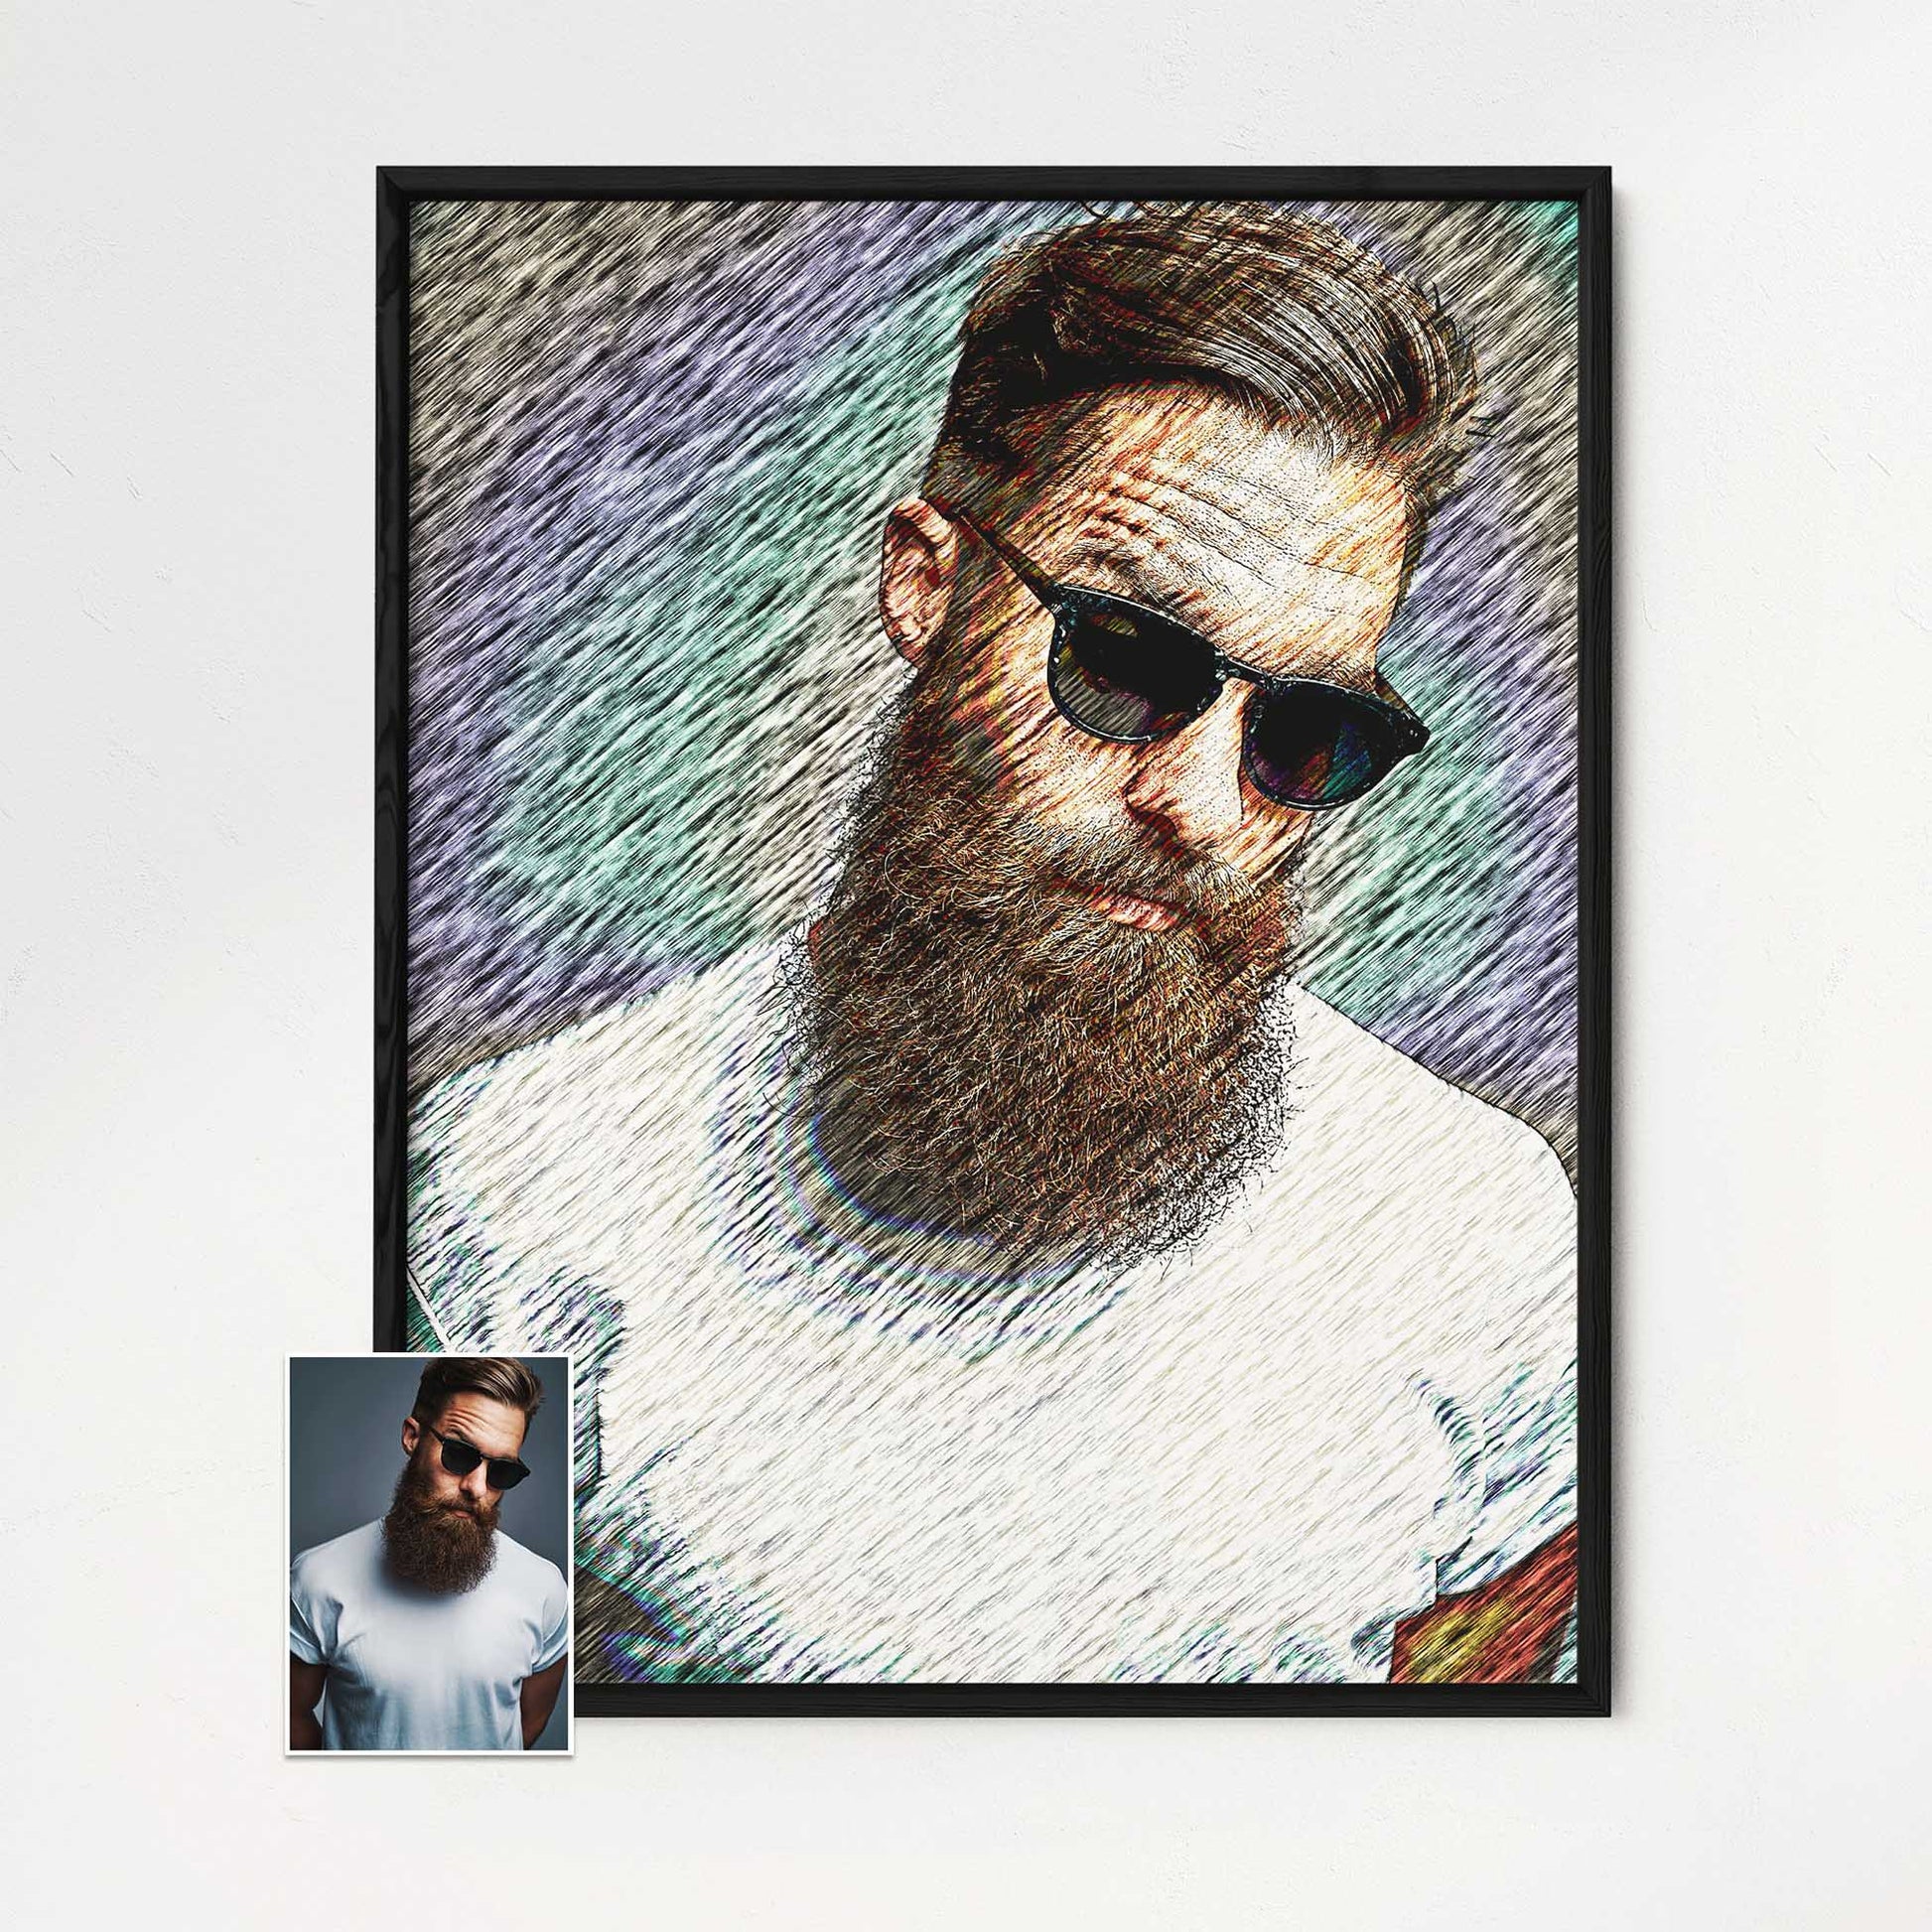 Experience the magic of our Personalised Artsy Illustration Framed Print. Created from your photo, this artwork is printed on museum-quality paper, guaranteeing a sharp and vivid image. Encased in a natural wood frame